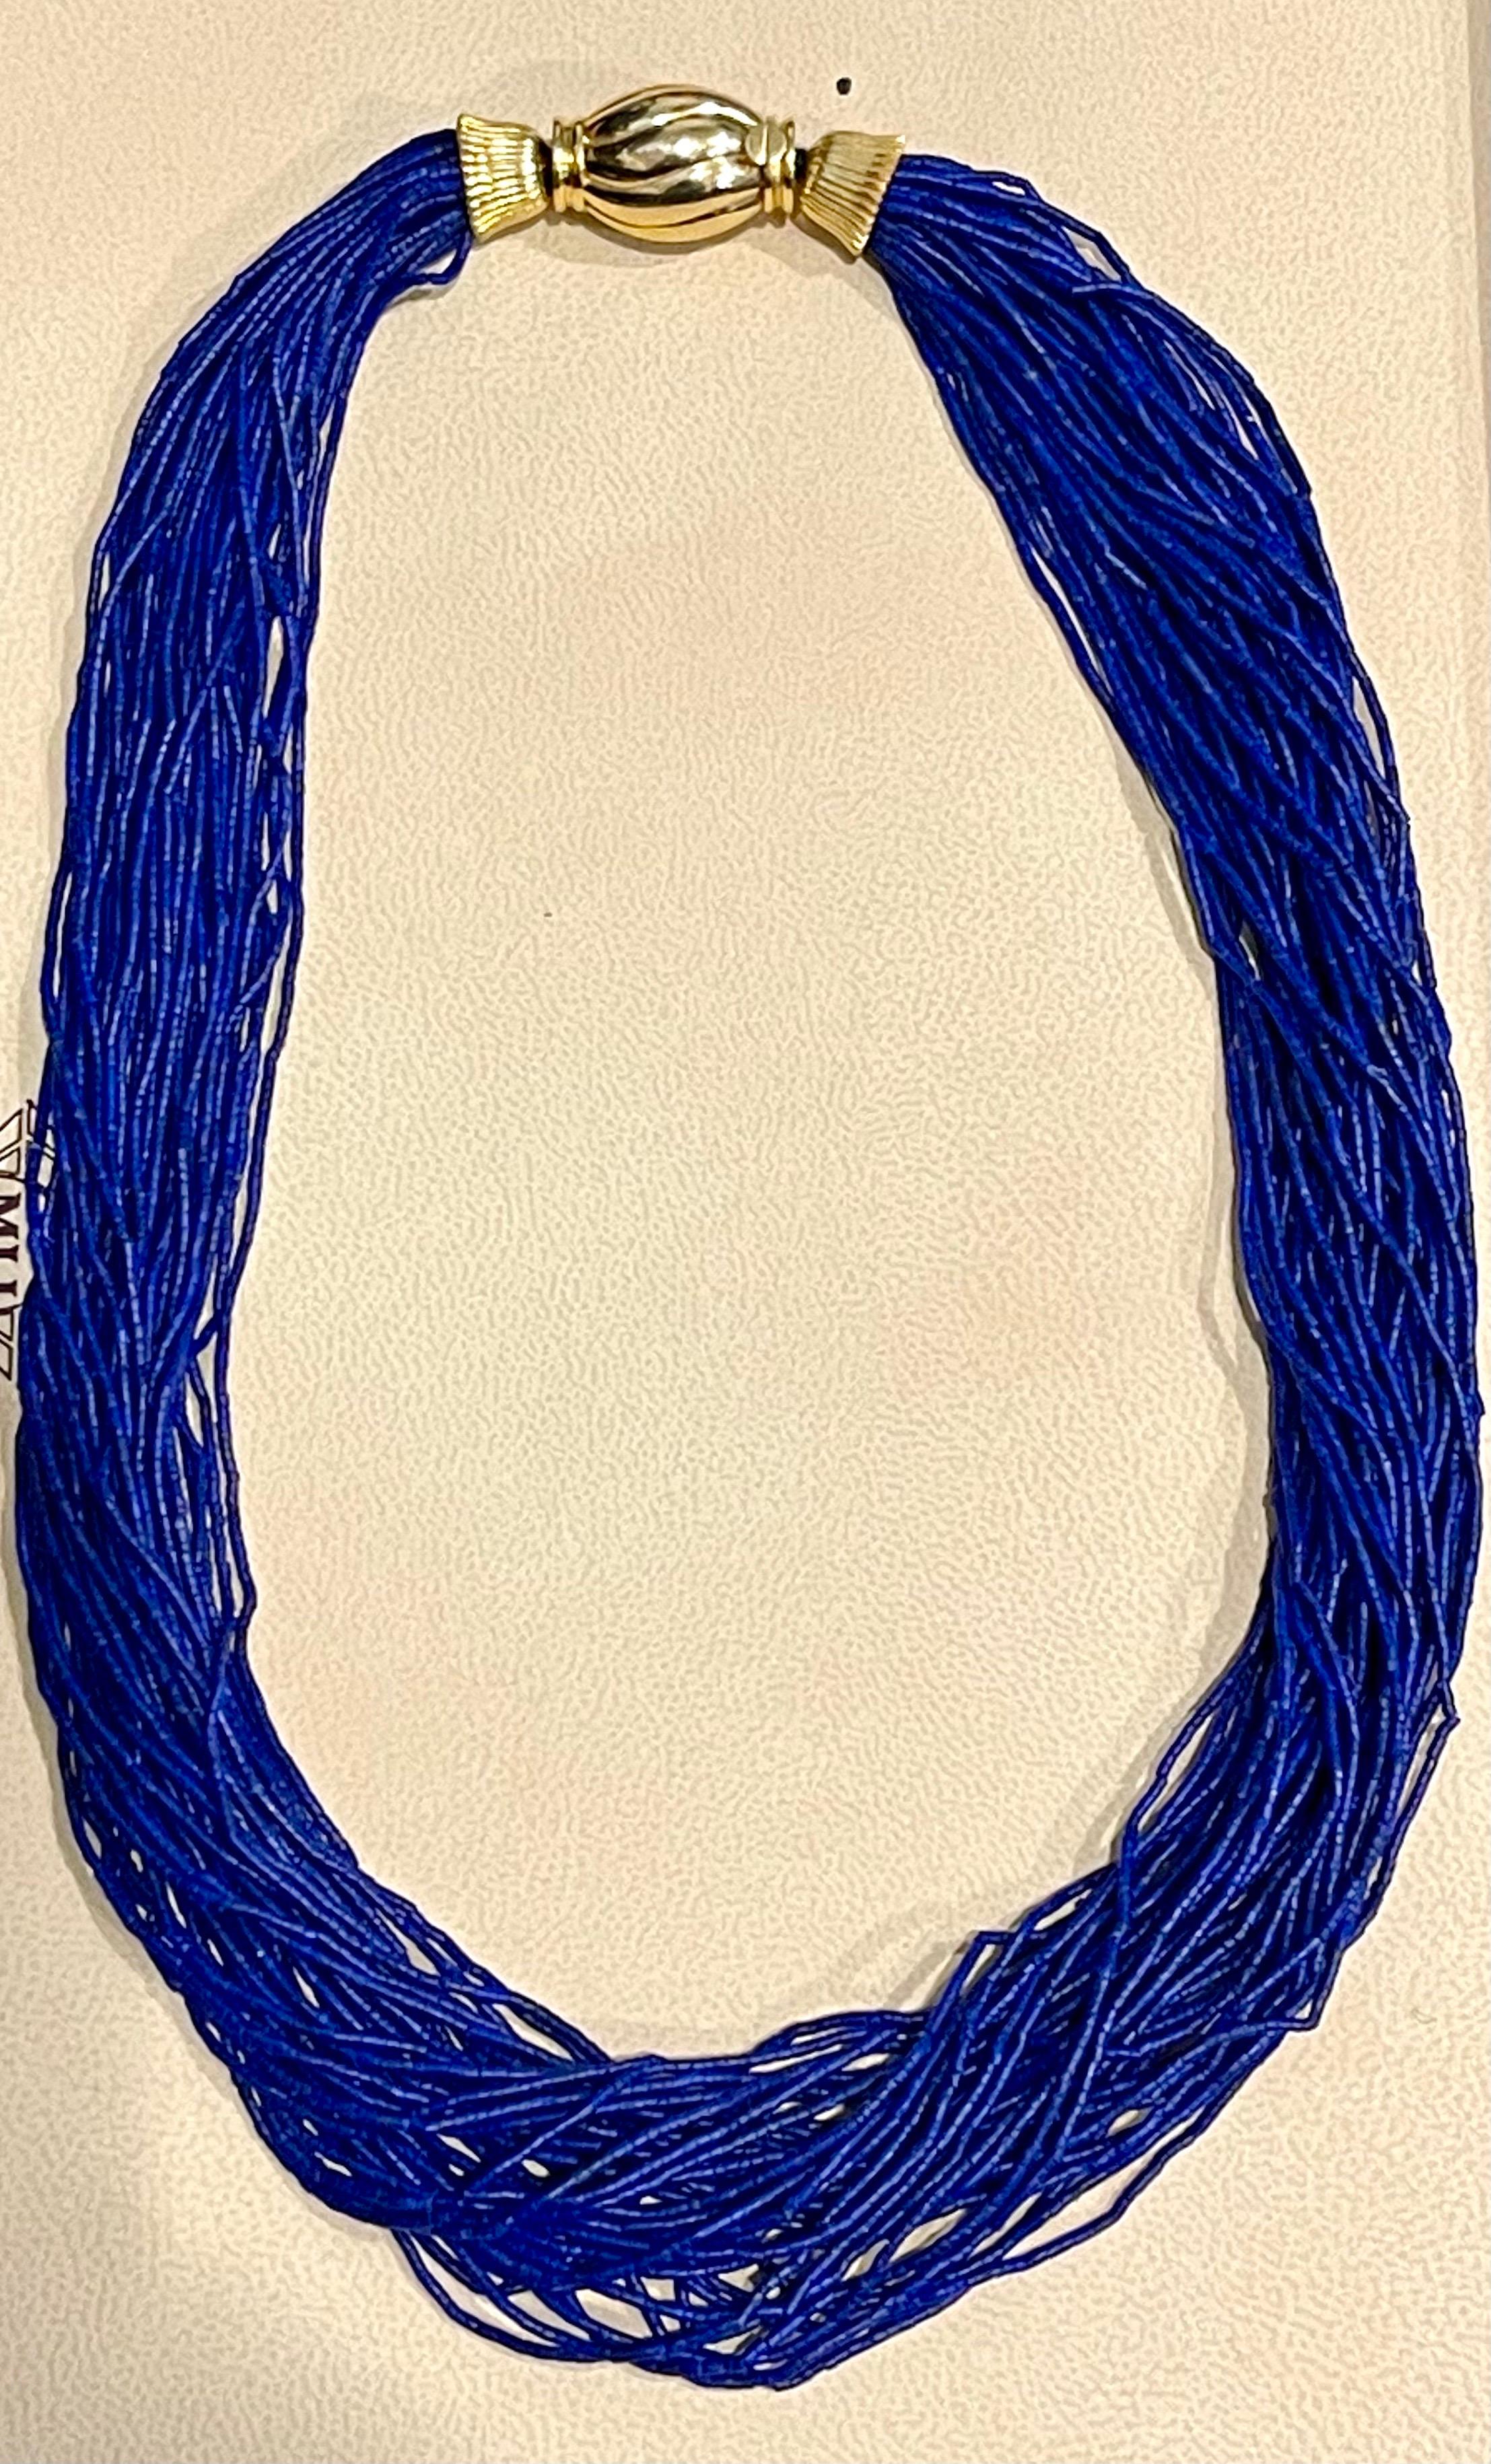 Certified Vintage Lapis Lazuli Multi Strand Necklace 14 Kt Yellow Gold Clasp In Excellent Condition For Sale In New York, NY